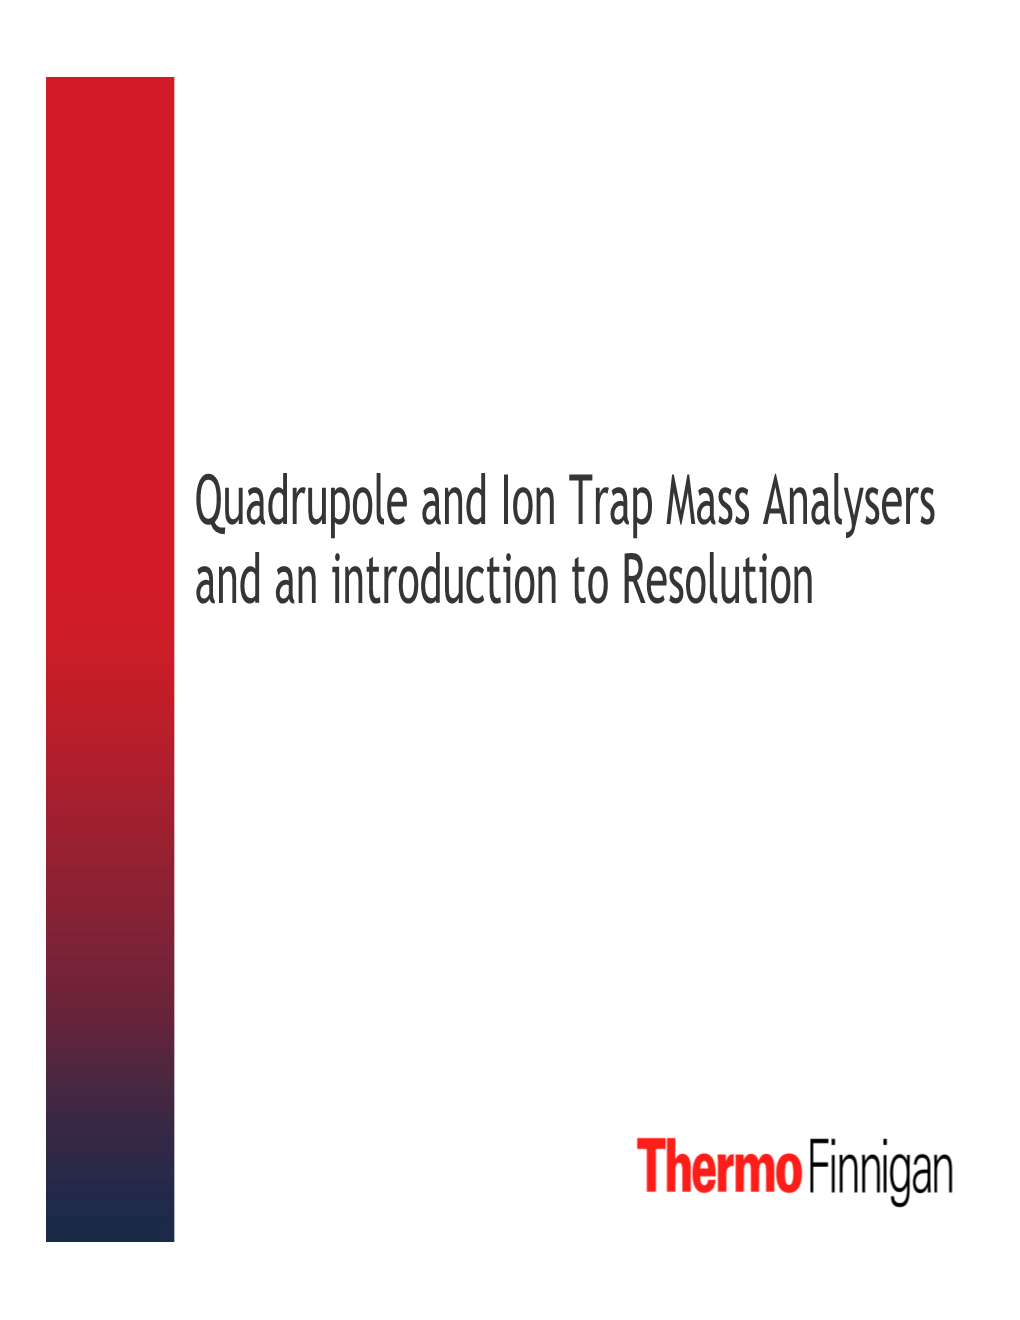 Quadrupole and Ion Trap Mass Analysers and an Introduction to Resolution a Simple Definition of a Mass Spectrometer